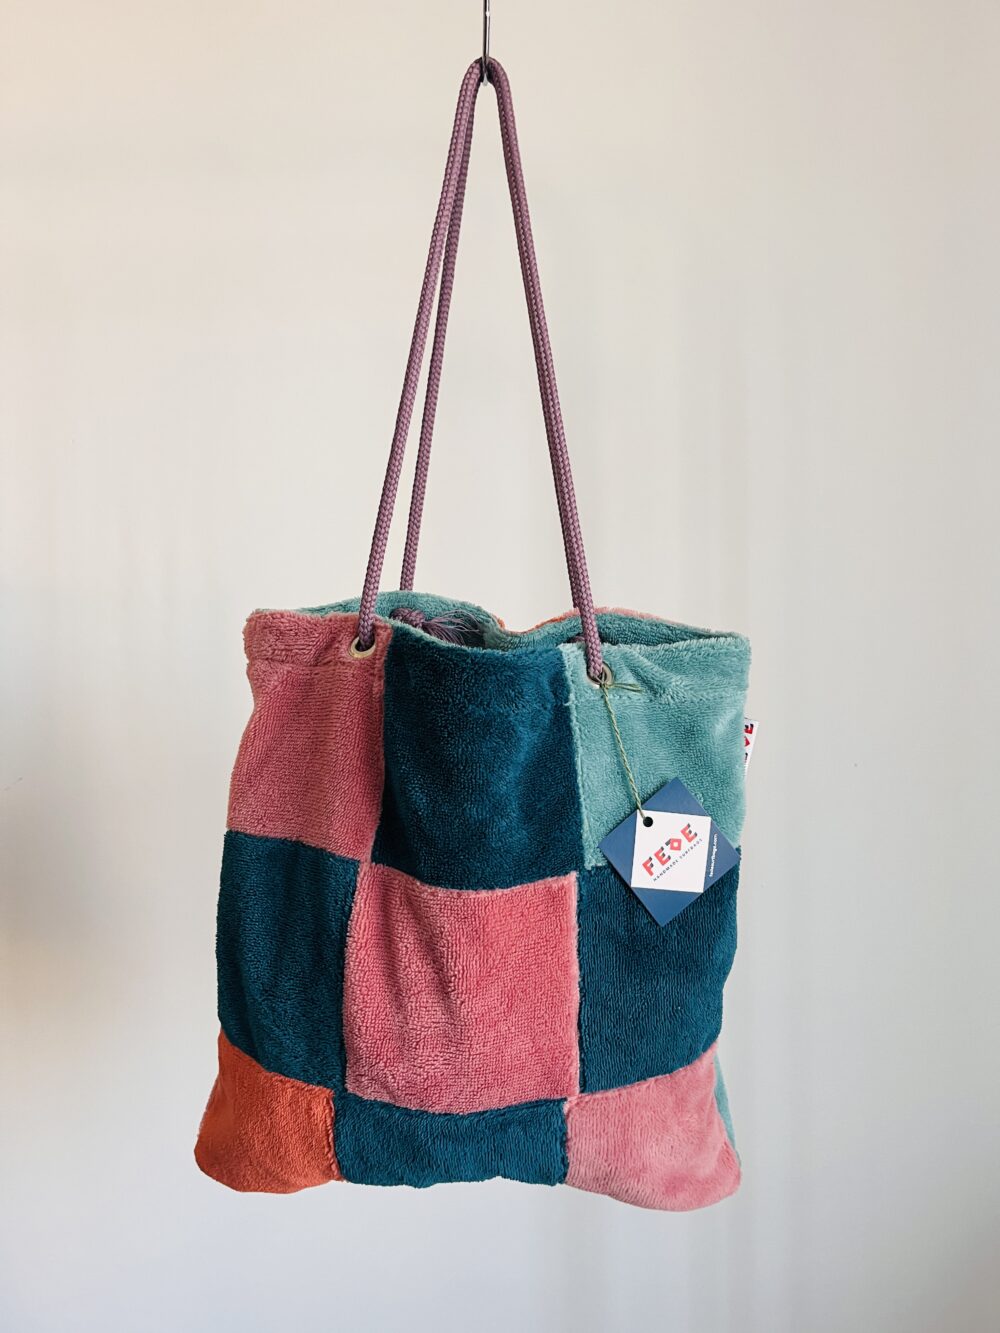 Shopper scacchi. Shopping bag in the softest terries with a colorful chess design